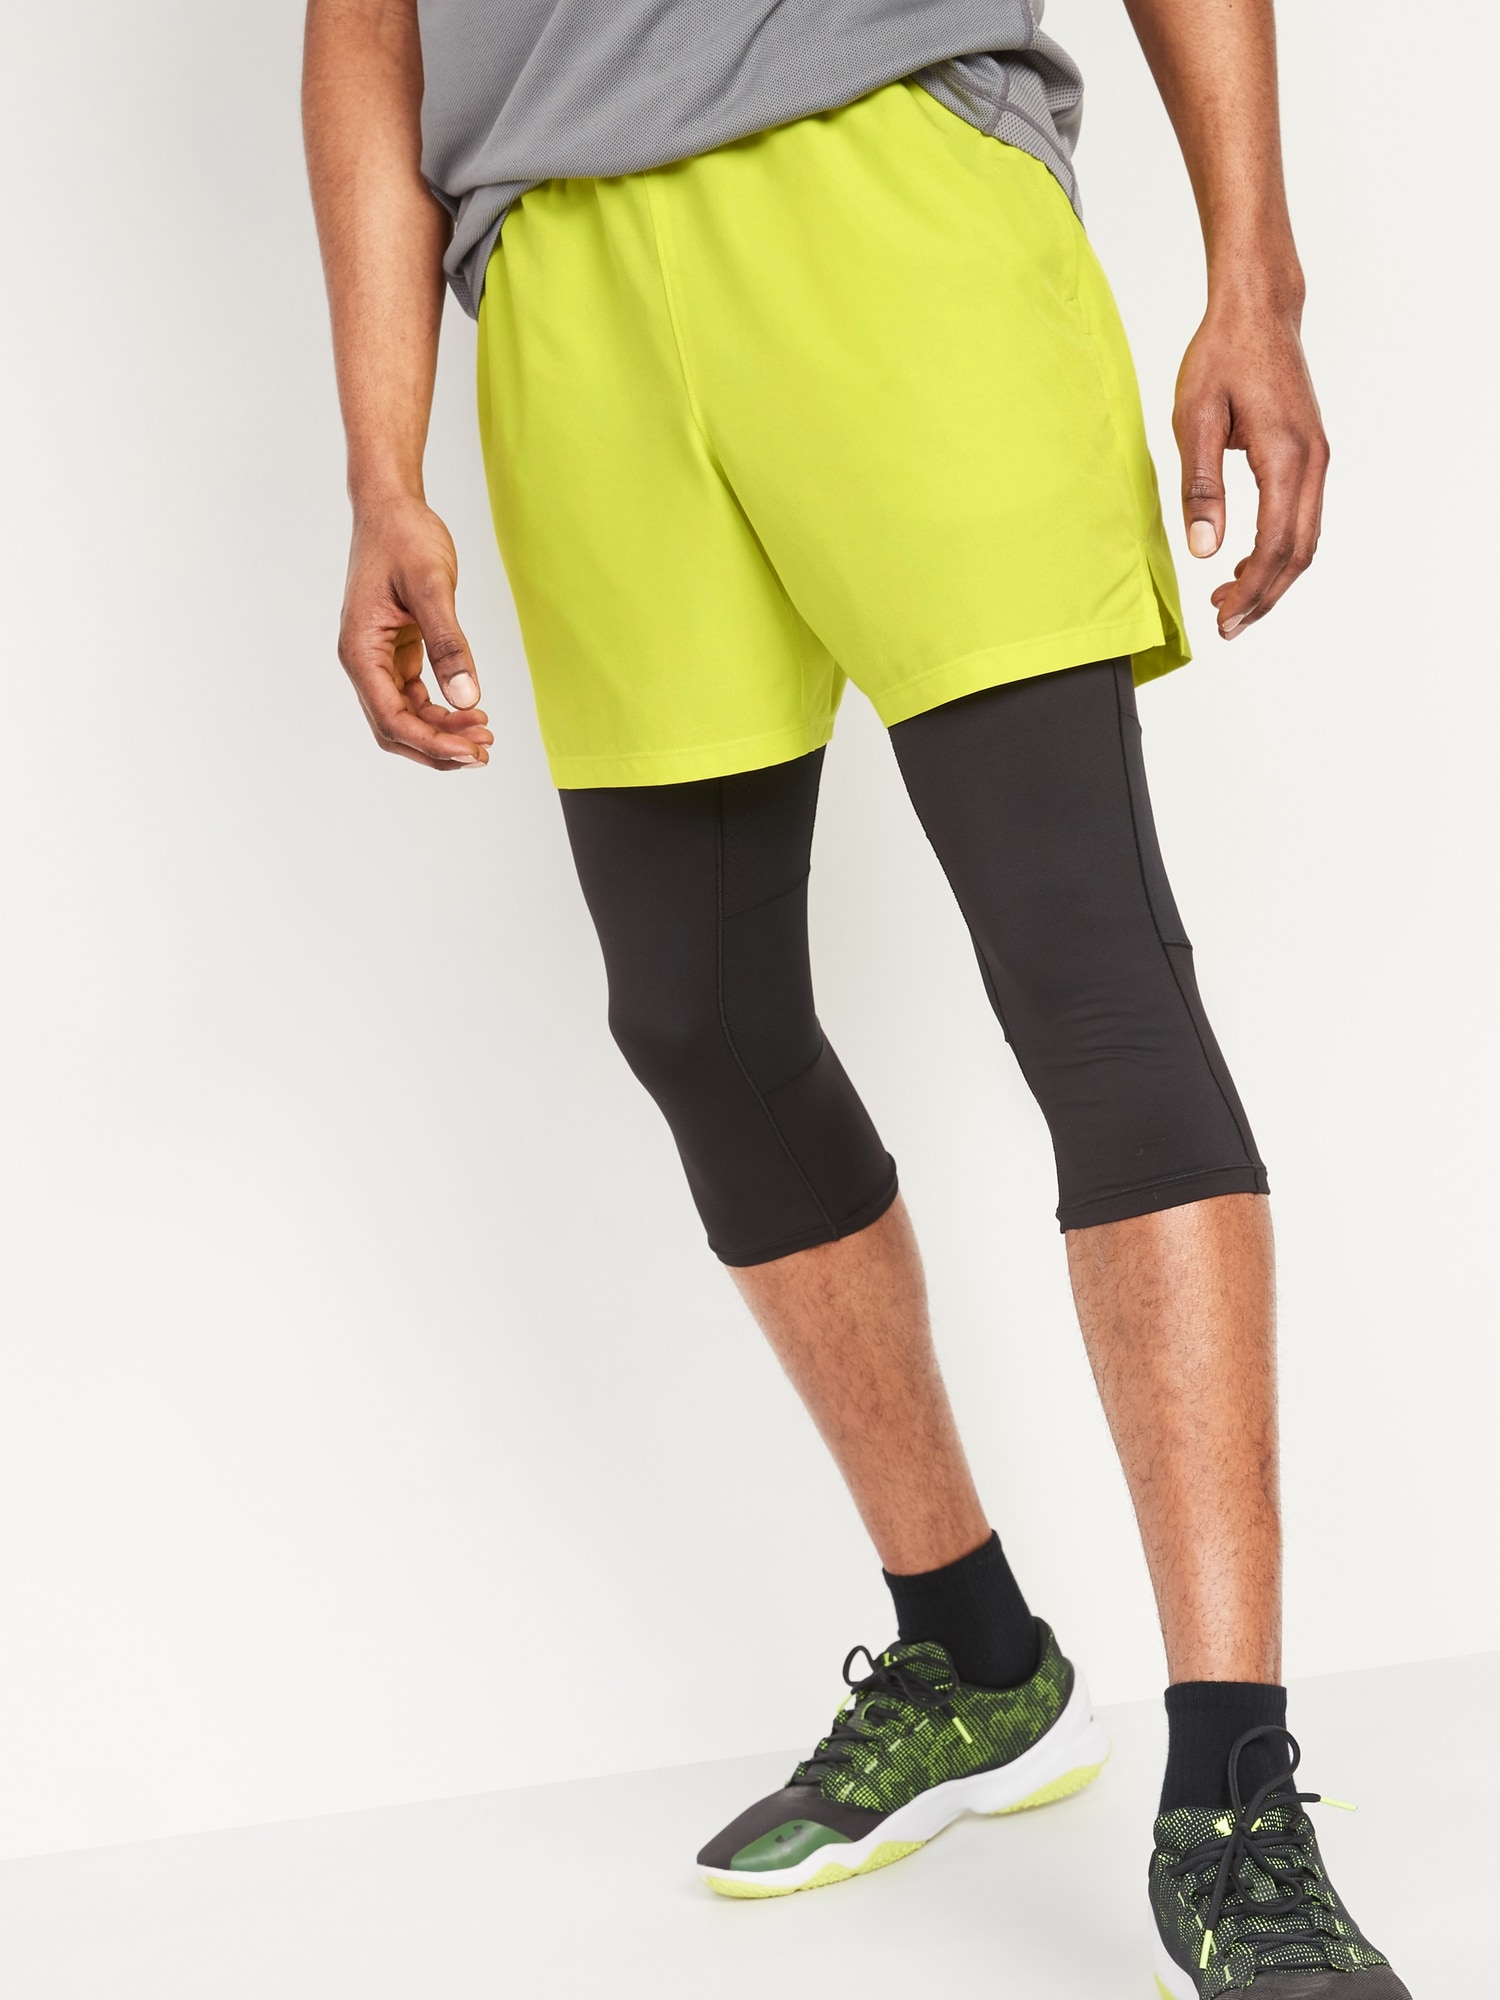 Go-Dry Cool Run Shorts for Men -- 7-inch inseam